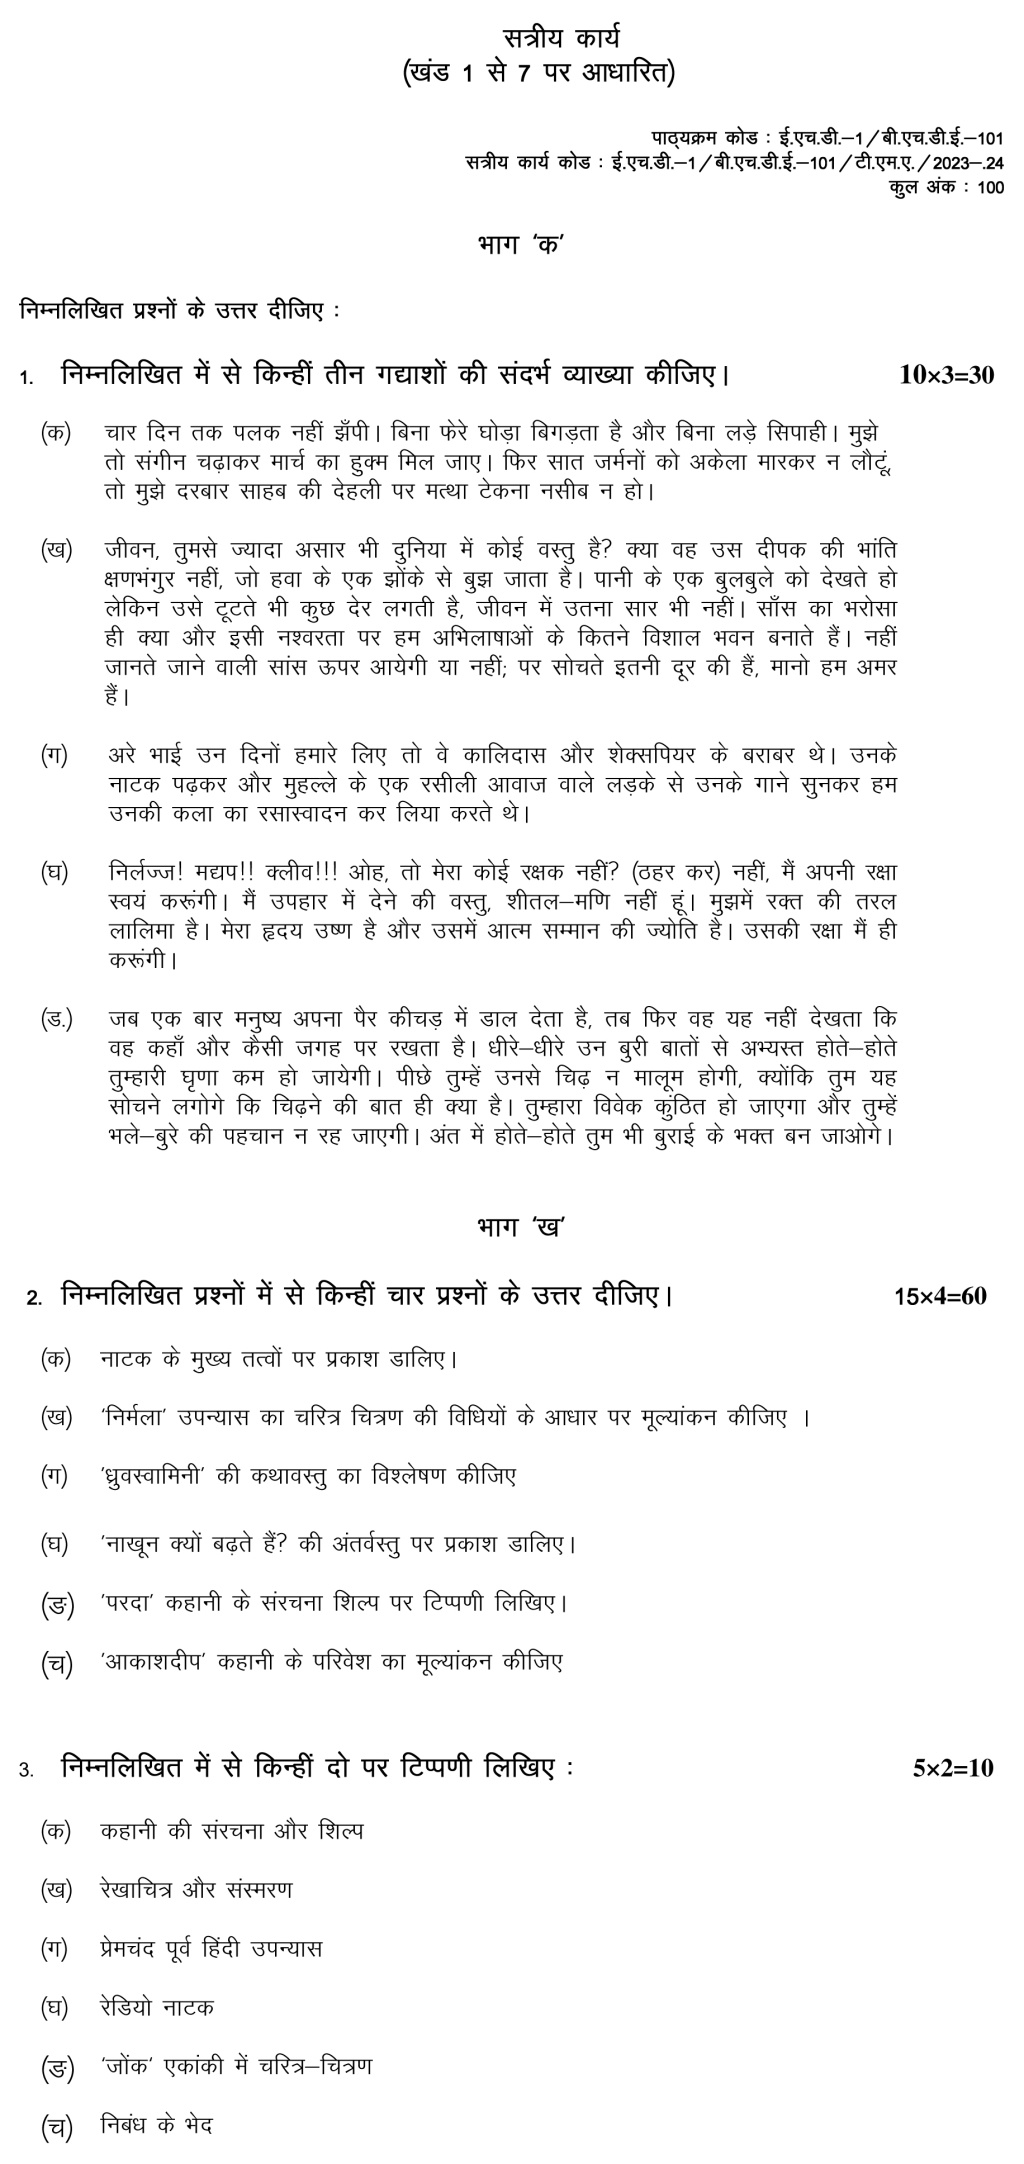 IGNOU EHD-01/BHDE-101 - Hindi Gadhya Latest Solved Assignment-July 2023 – January 2024